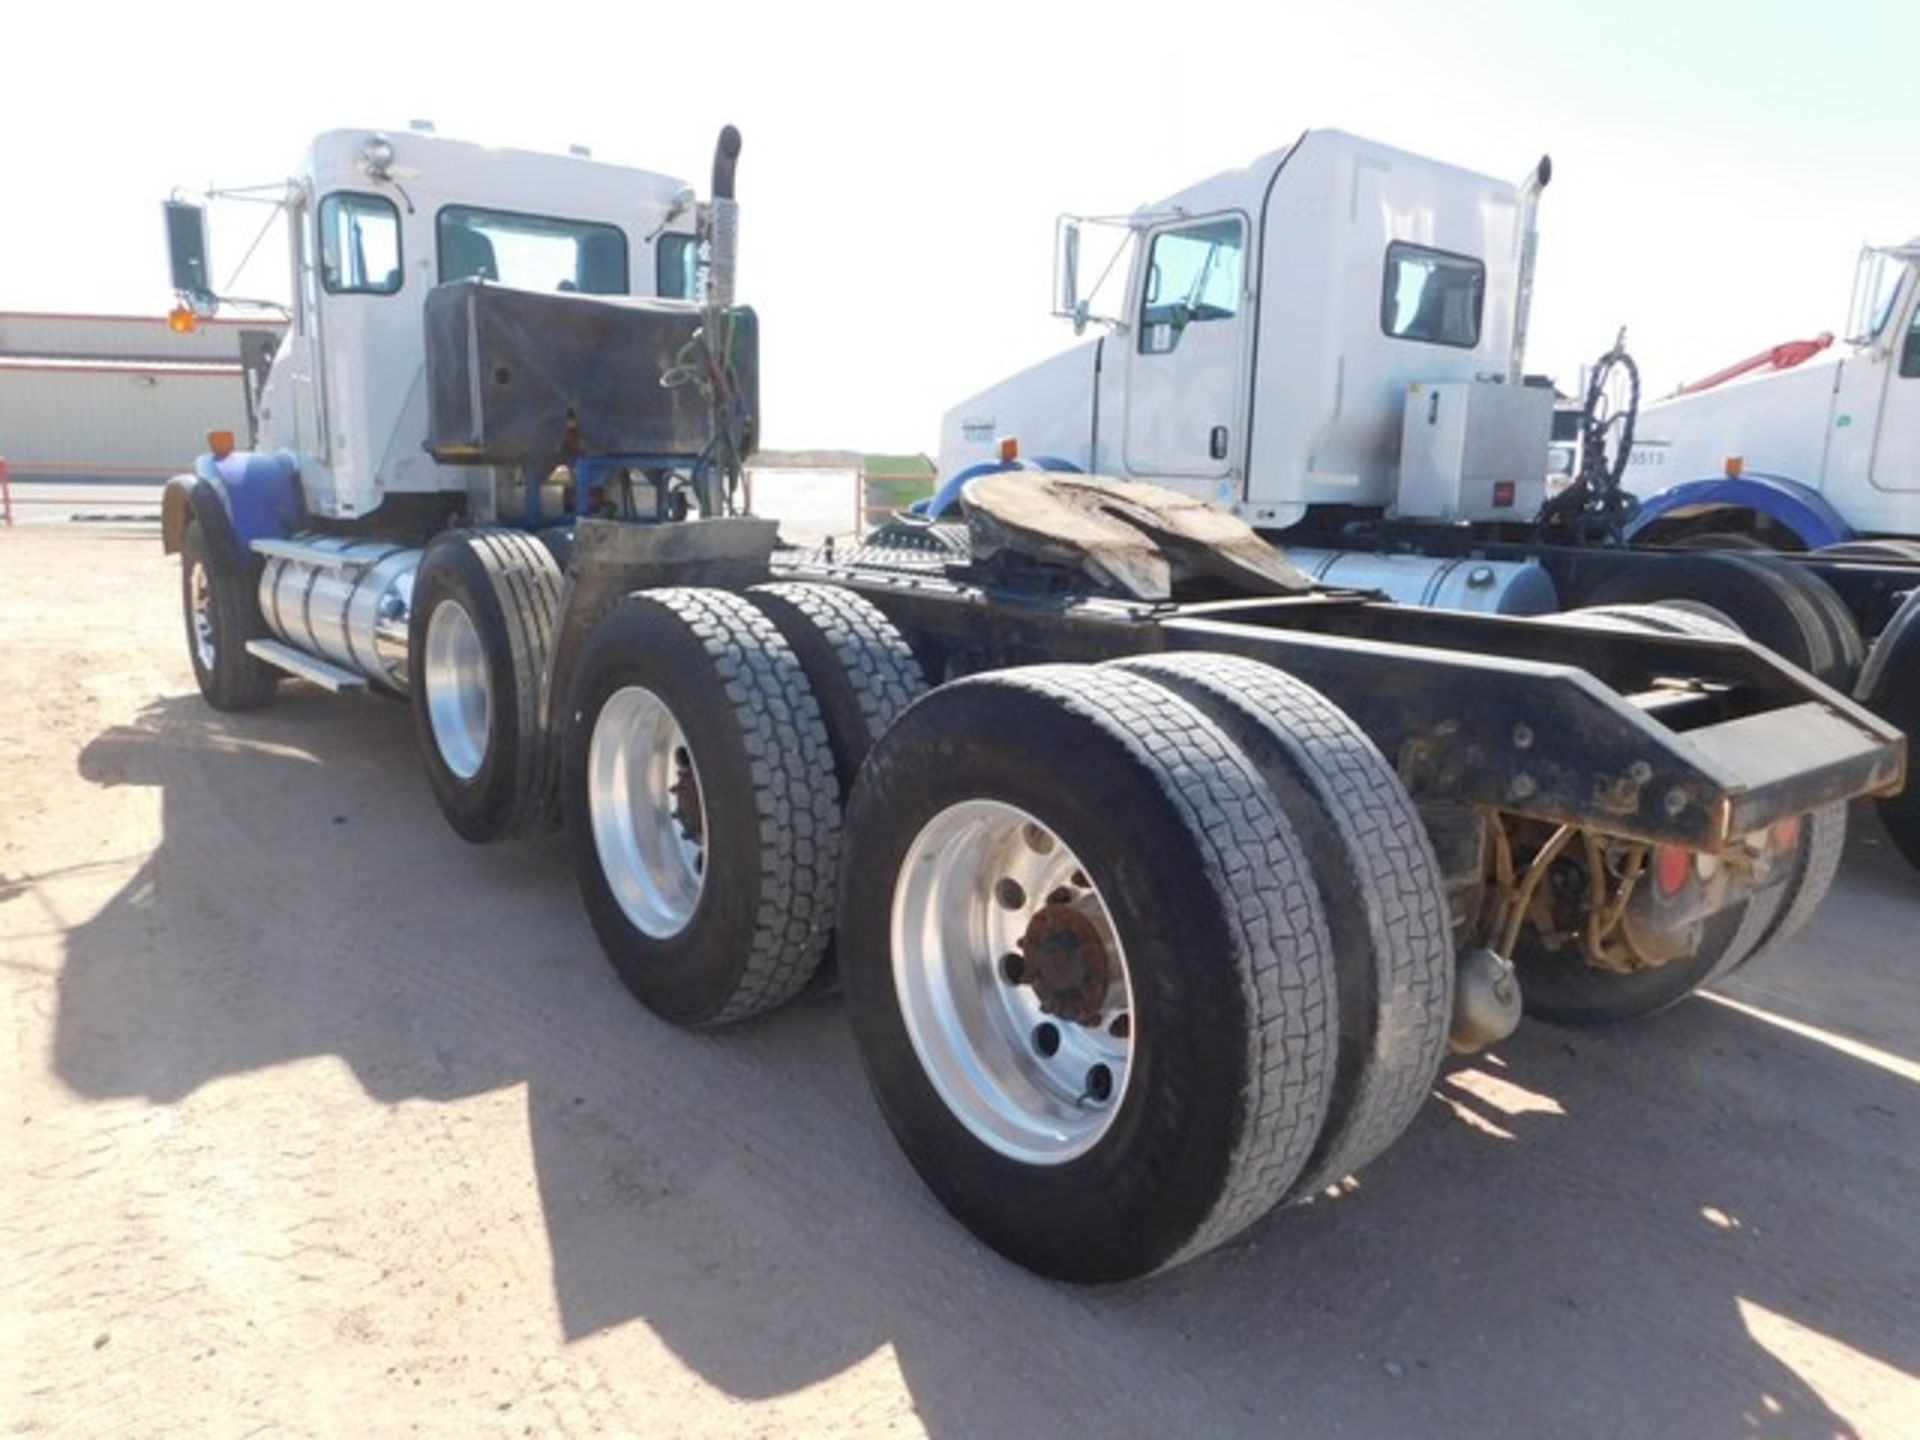 Located in YARD 1 - Midland, TX (2264) (X) 2013 KENWORTH T800 4 AXLE DAY CAB HAUL TRUCK, VIN- - Image 4 of 8